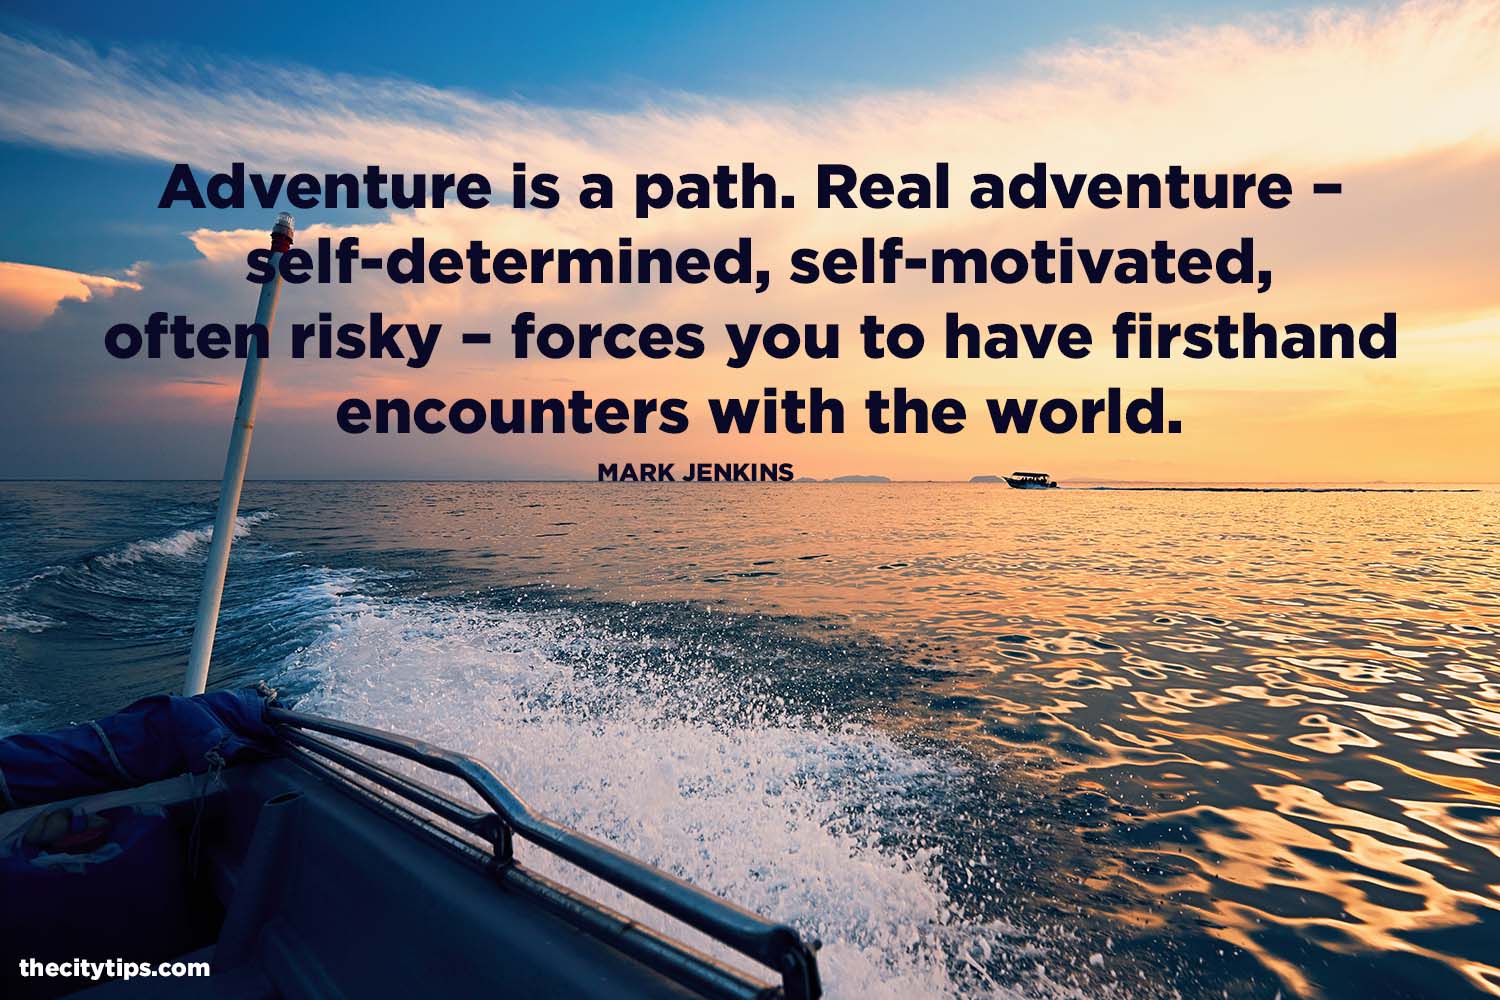 "Adventure is a path. Real adventure – self-determined, self-motivated, often risky – forces you to have firsthand encounters with the world." by Mark Jenkins